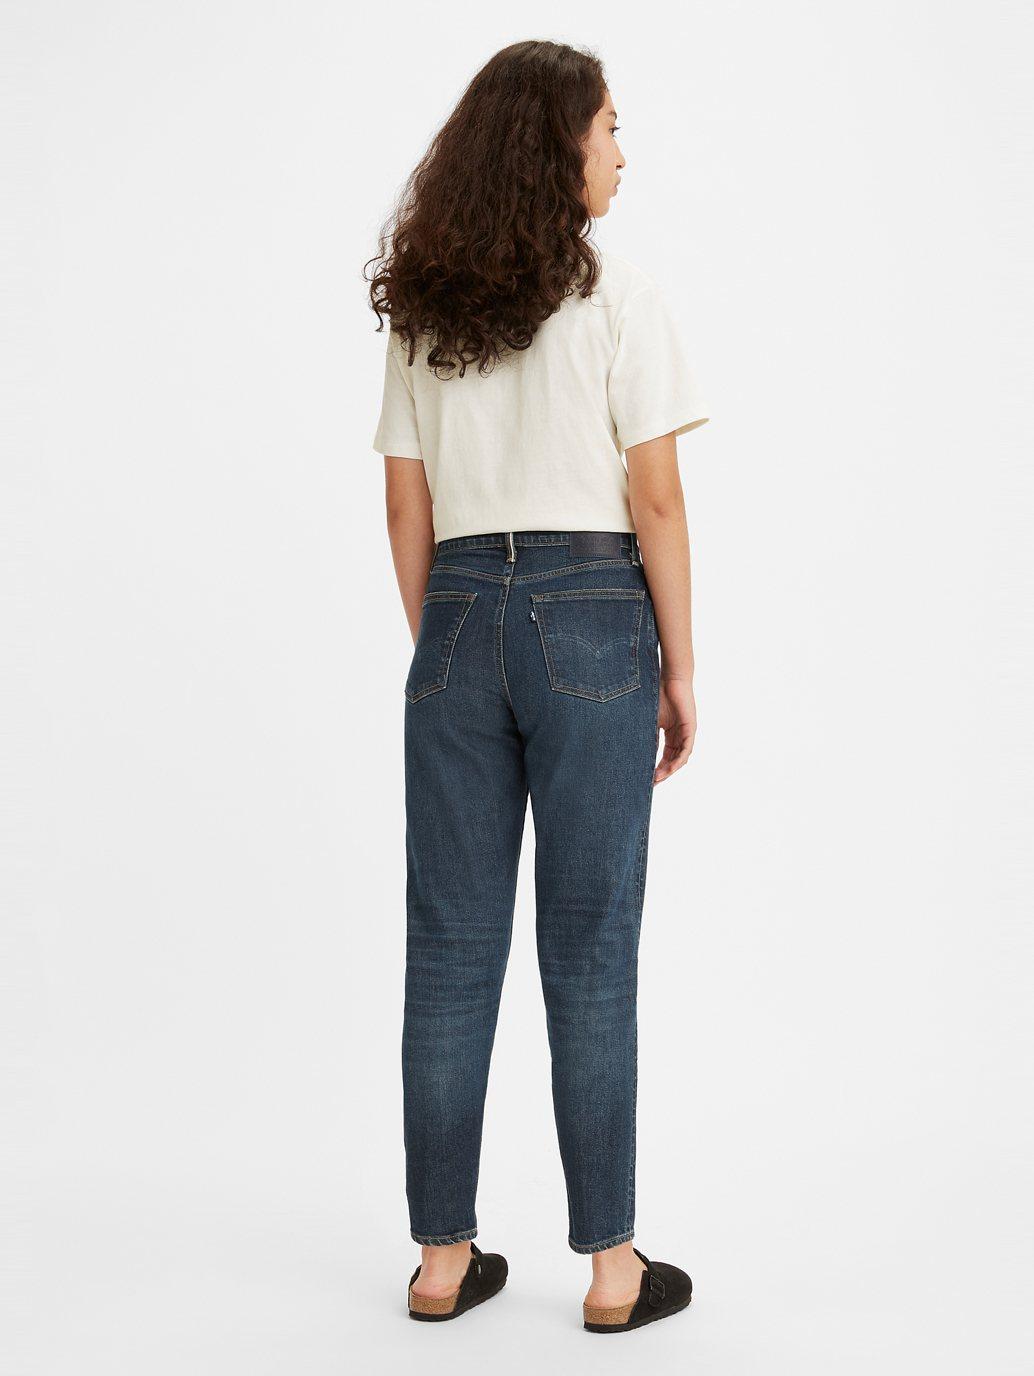 Buy Levi's® Made & Crafted® Women's High Rise Boyfriend Jeans | Levi's ...